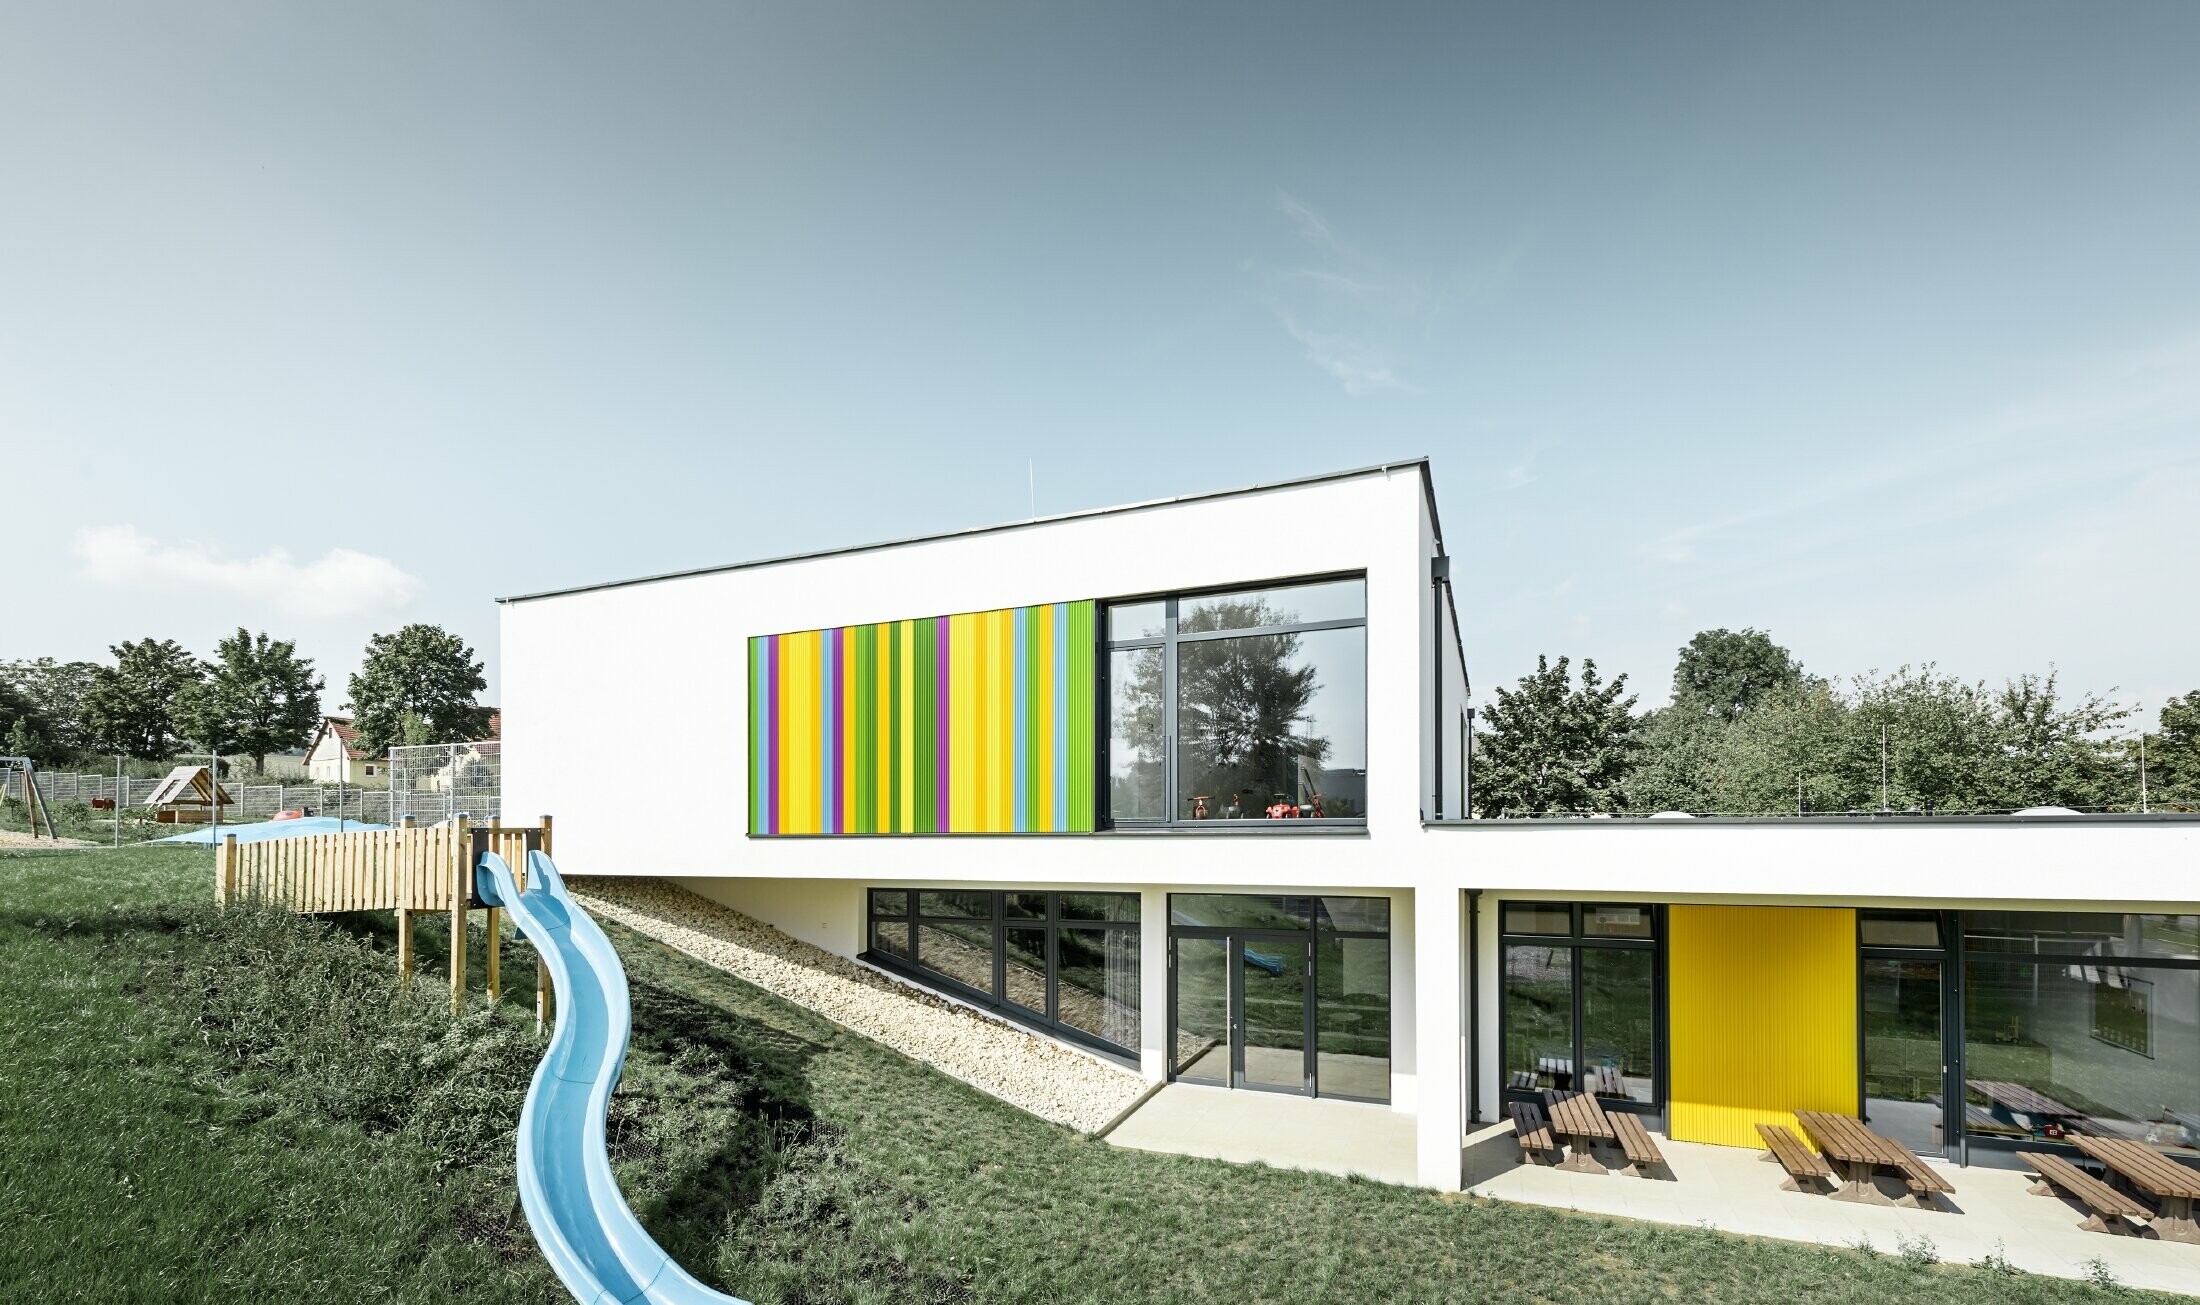 Rear view of the kindergarten in Hargelsberg with the colourful PREFA zig-zag profile in the colours yellow, green, purple and blue